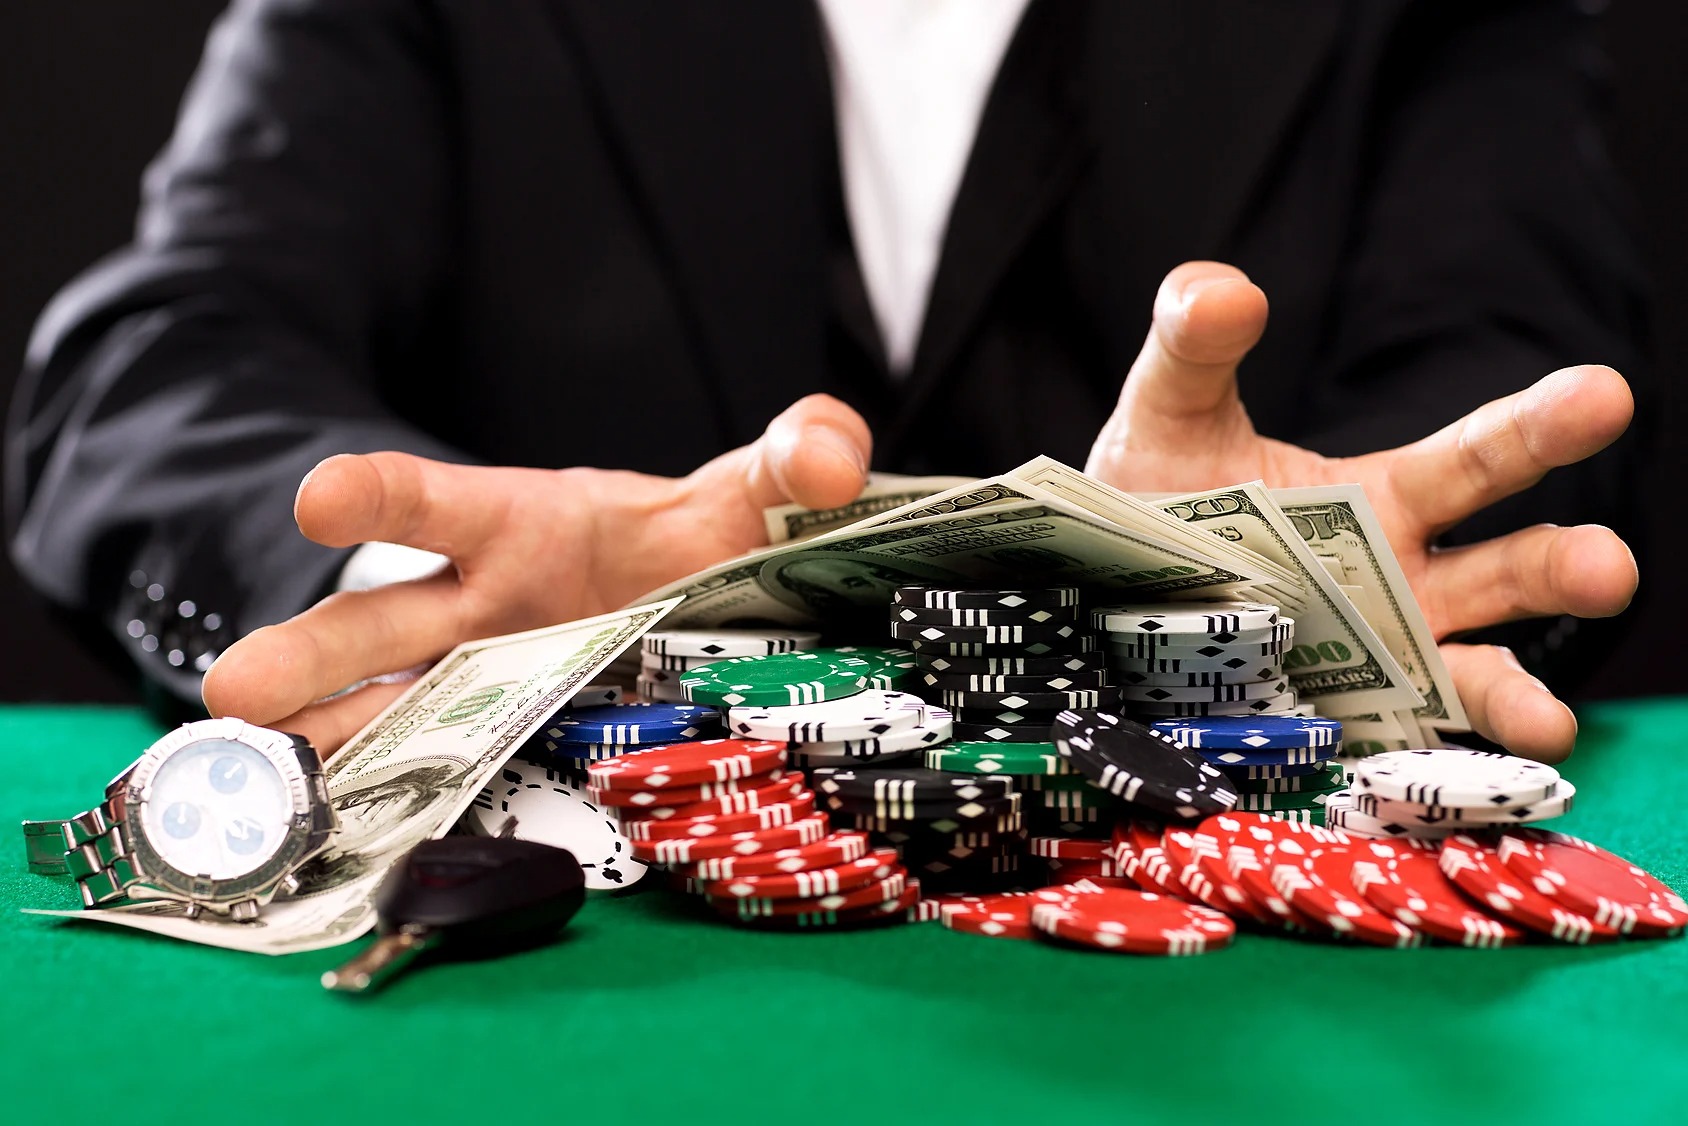 India's booming gambling sector under threat